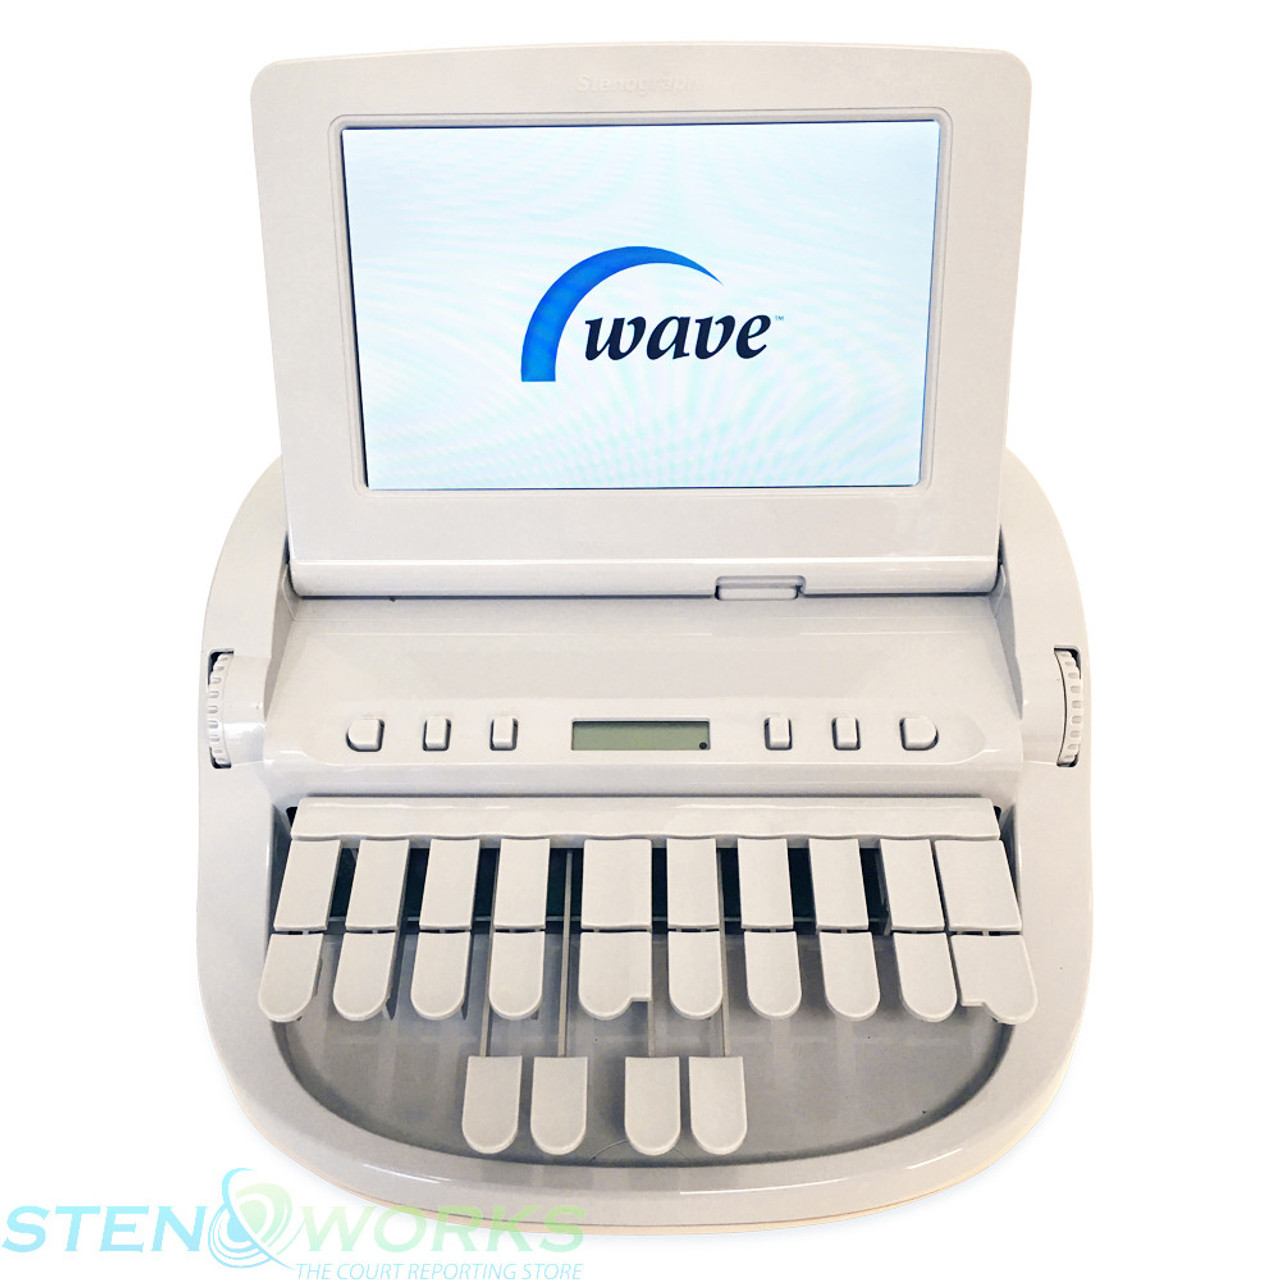 stenograph cat software